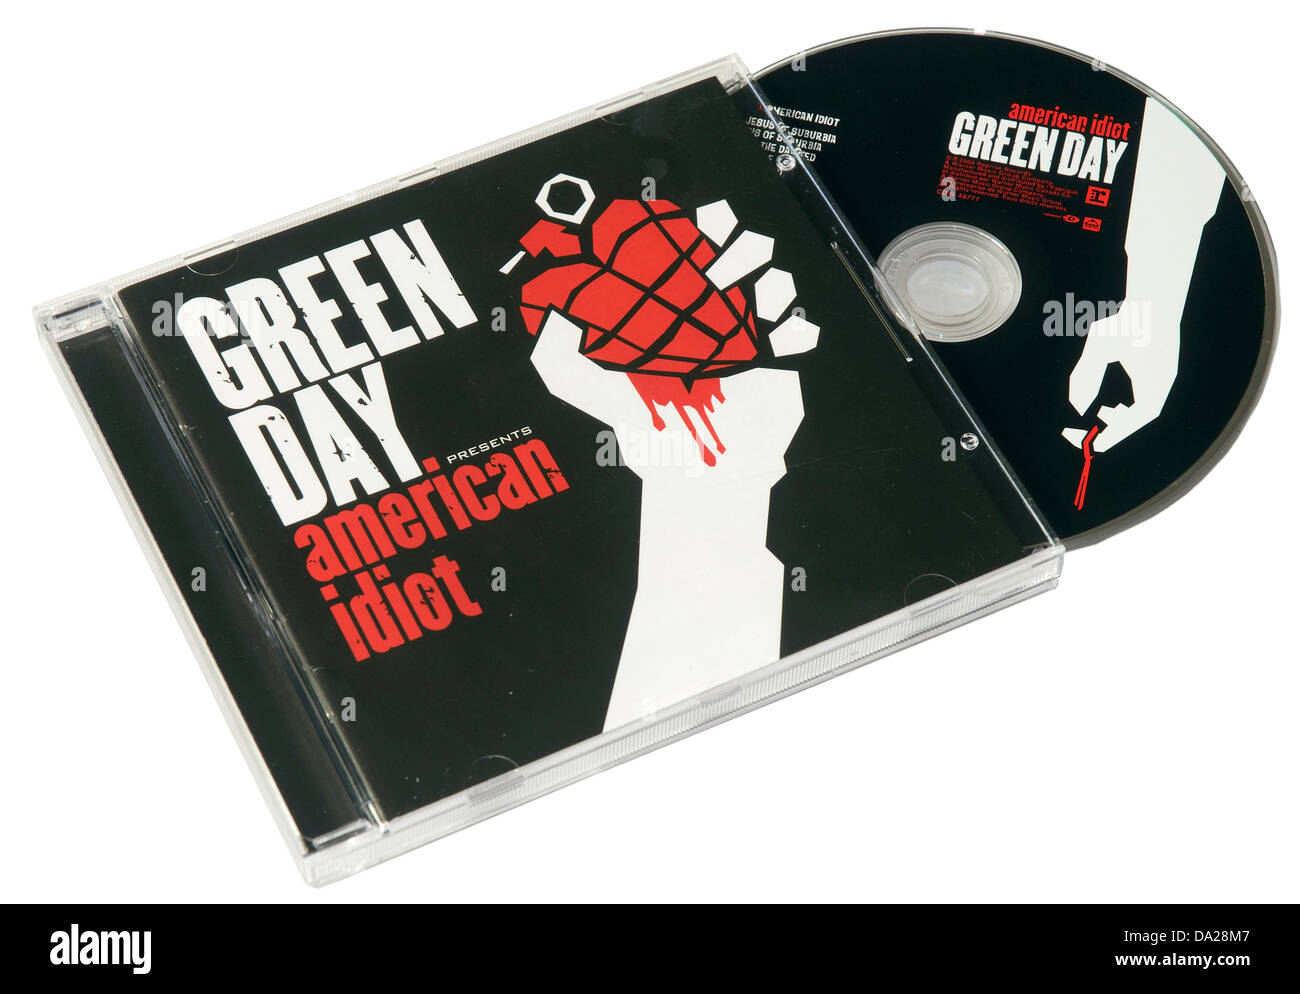 Green Day American Idiot Amended Amazon Com Music